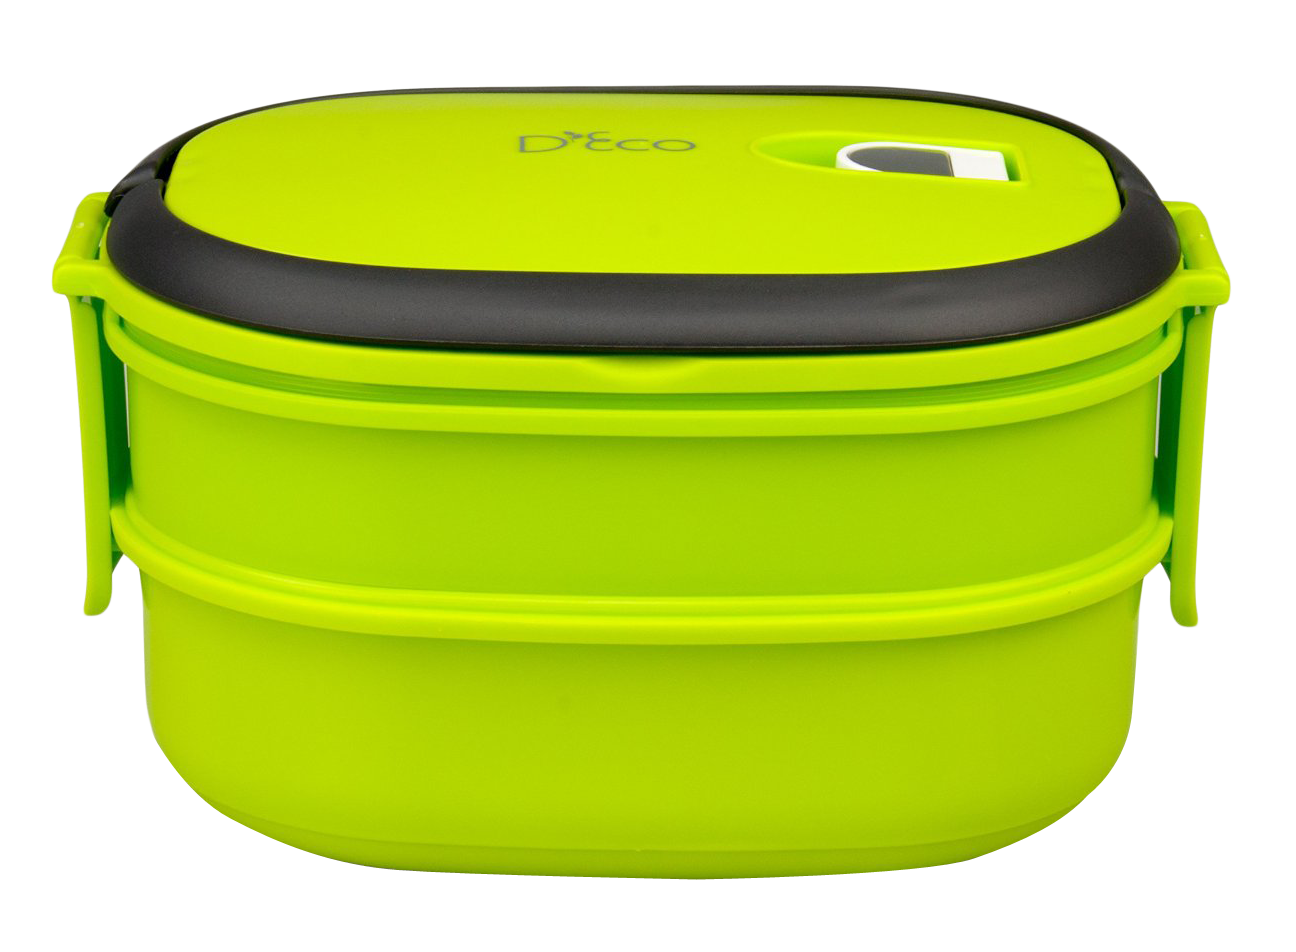 Lunch Box Png Hdpng.com 1296 - Lunch Box, Transparent background PNG HD thumbnail